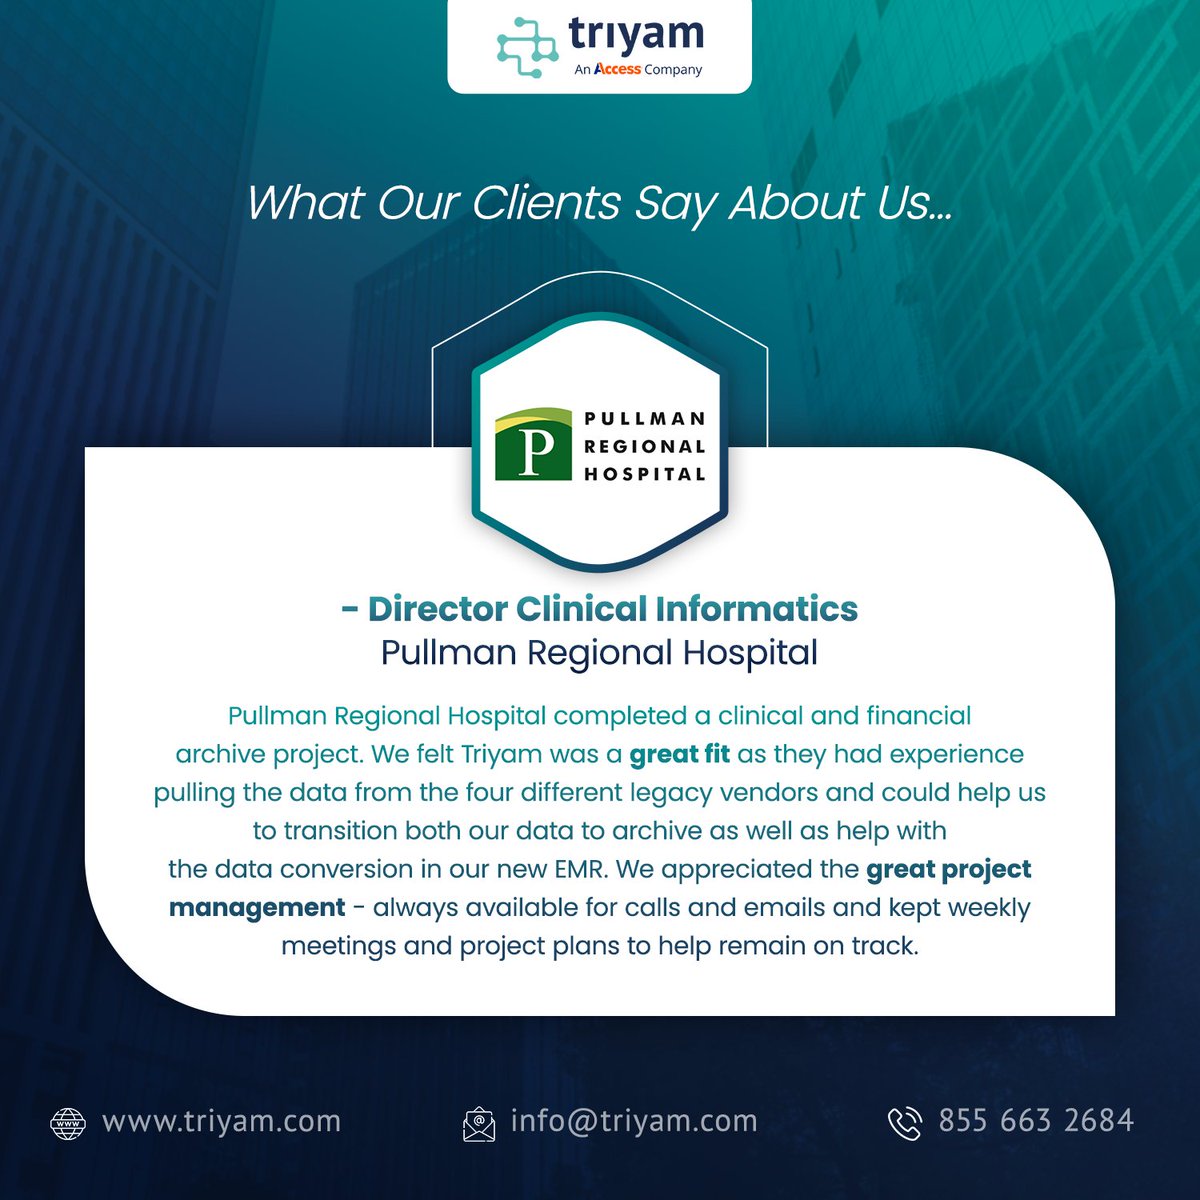 Here’s why Pullman Regional Hospital chose Triyam for their clinical and financial archive project!

Experience the difference with Triyam - where your project success is our top priority!

#CustomerTestimonial #HealthcareIT #DataArchival